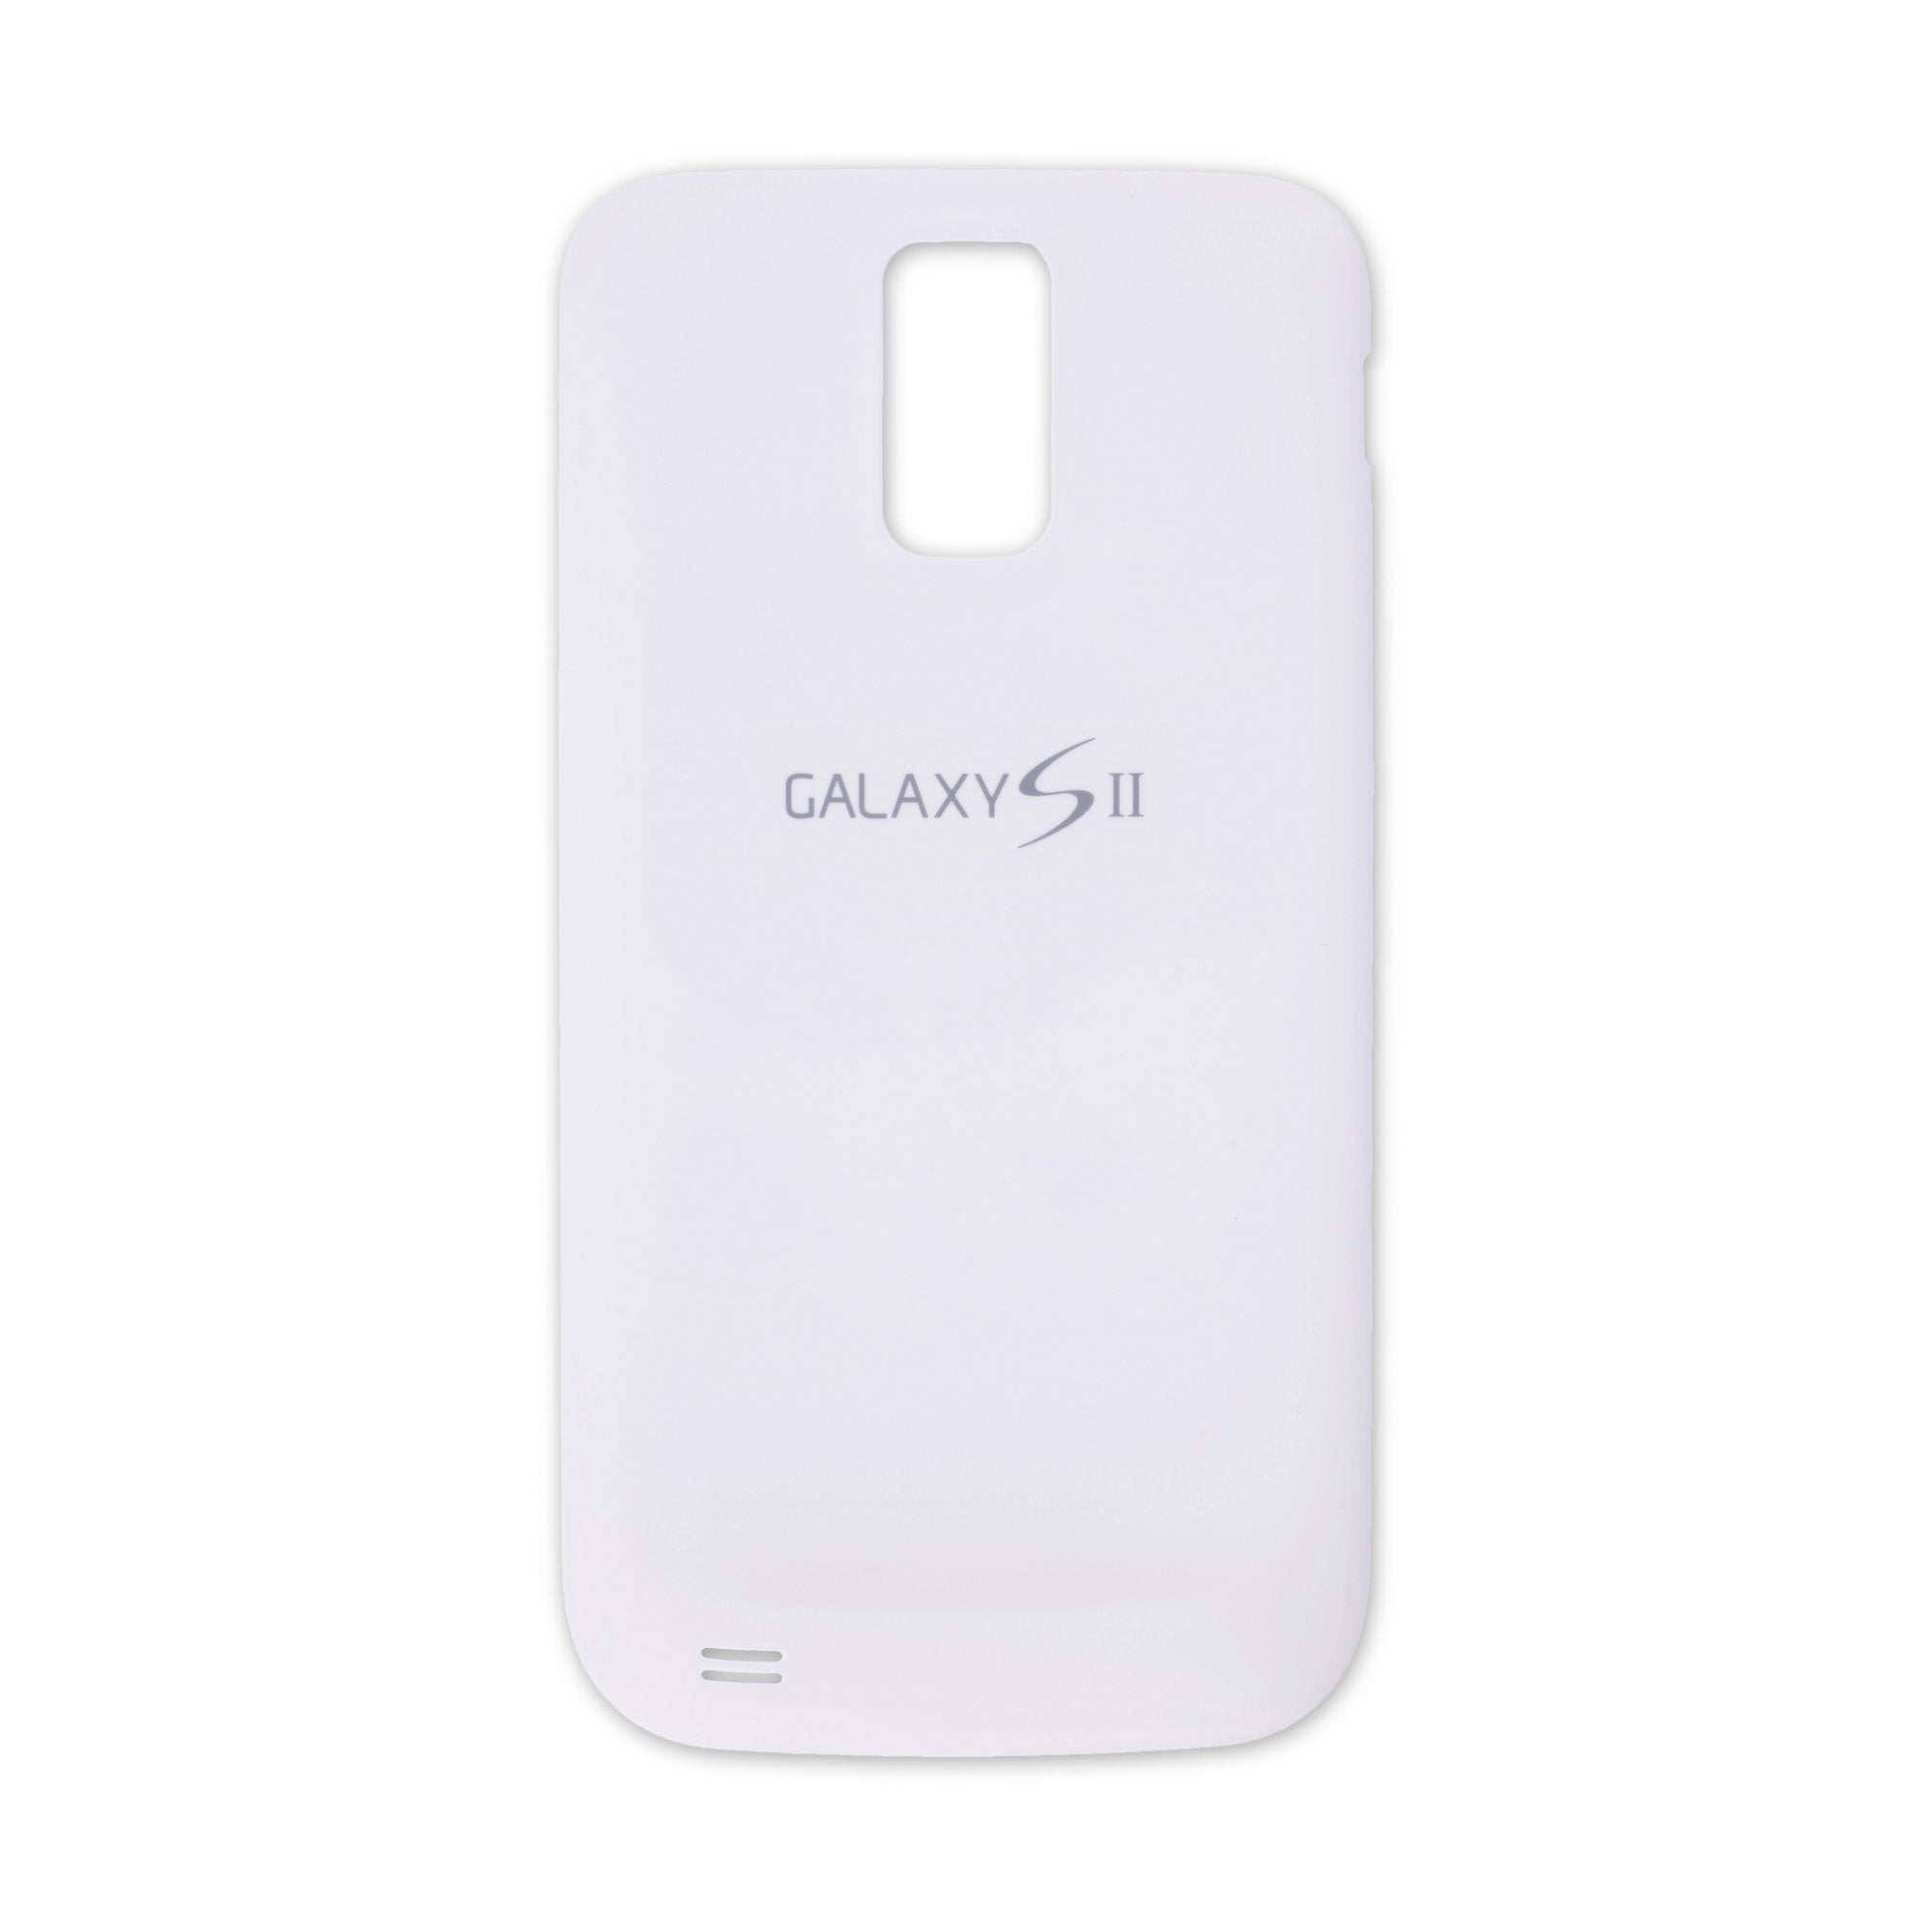 Galaxy S II Battery Cover (T-Mobile) White New GH98-21061B